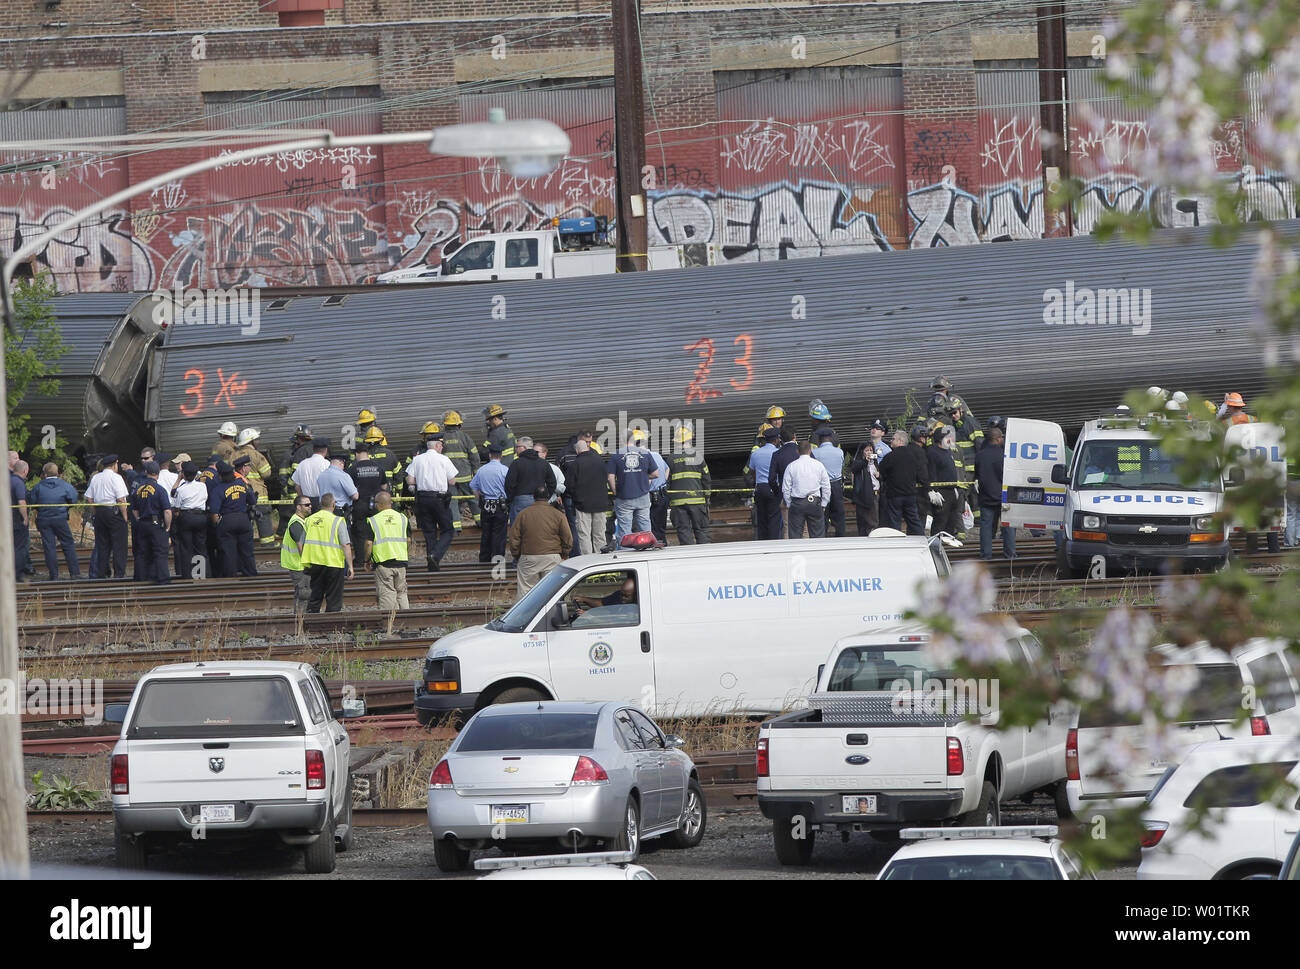 A Medical Examiner truck pulls up to where Police, emergency and rescue  workers surround the car of an Amtrak train that crashed on May 13, 2015 in  Philadelphia. At least six people